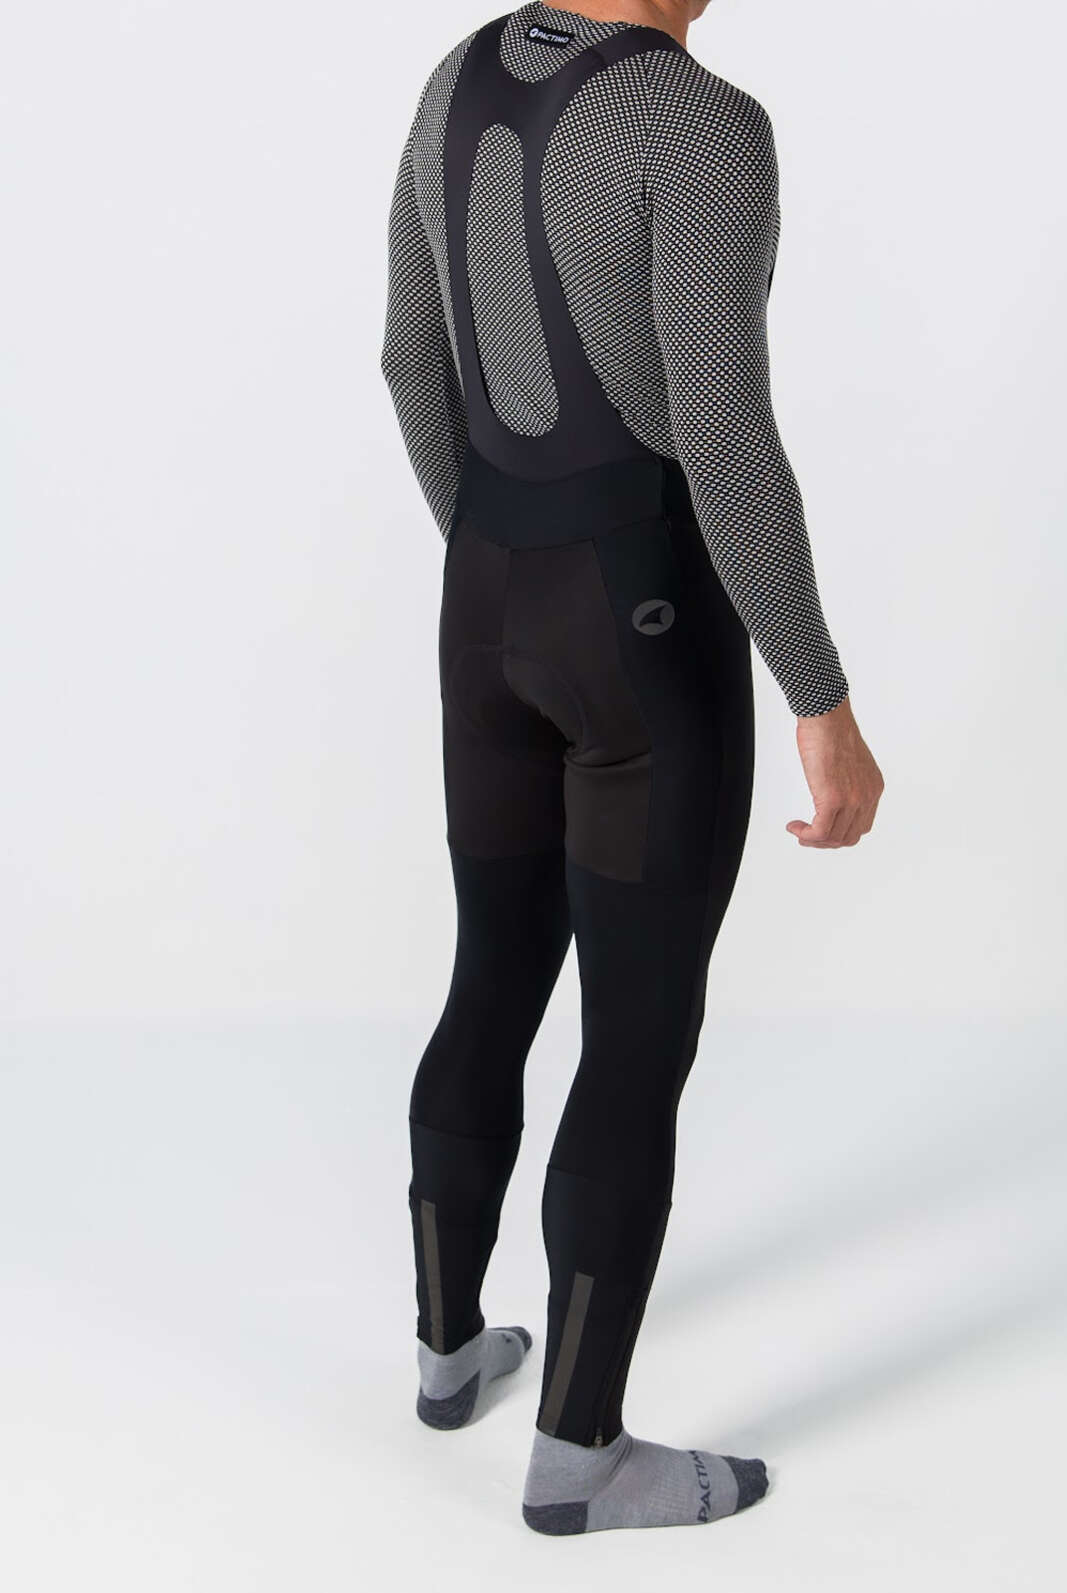 Men's Winter Cycling Tights - Back View